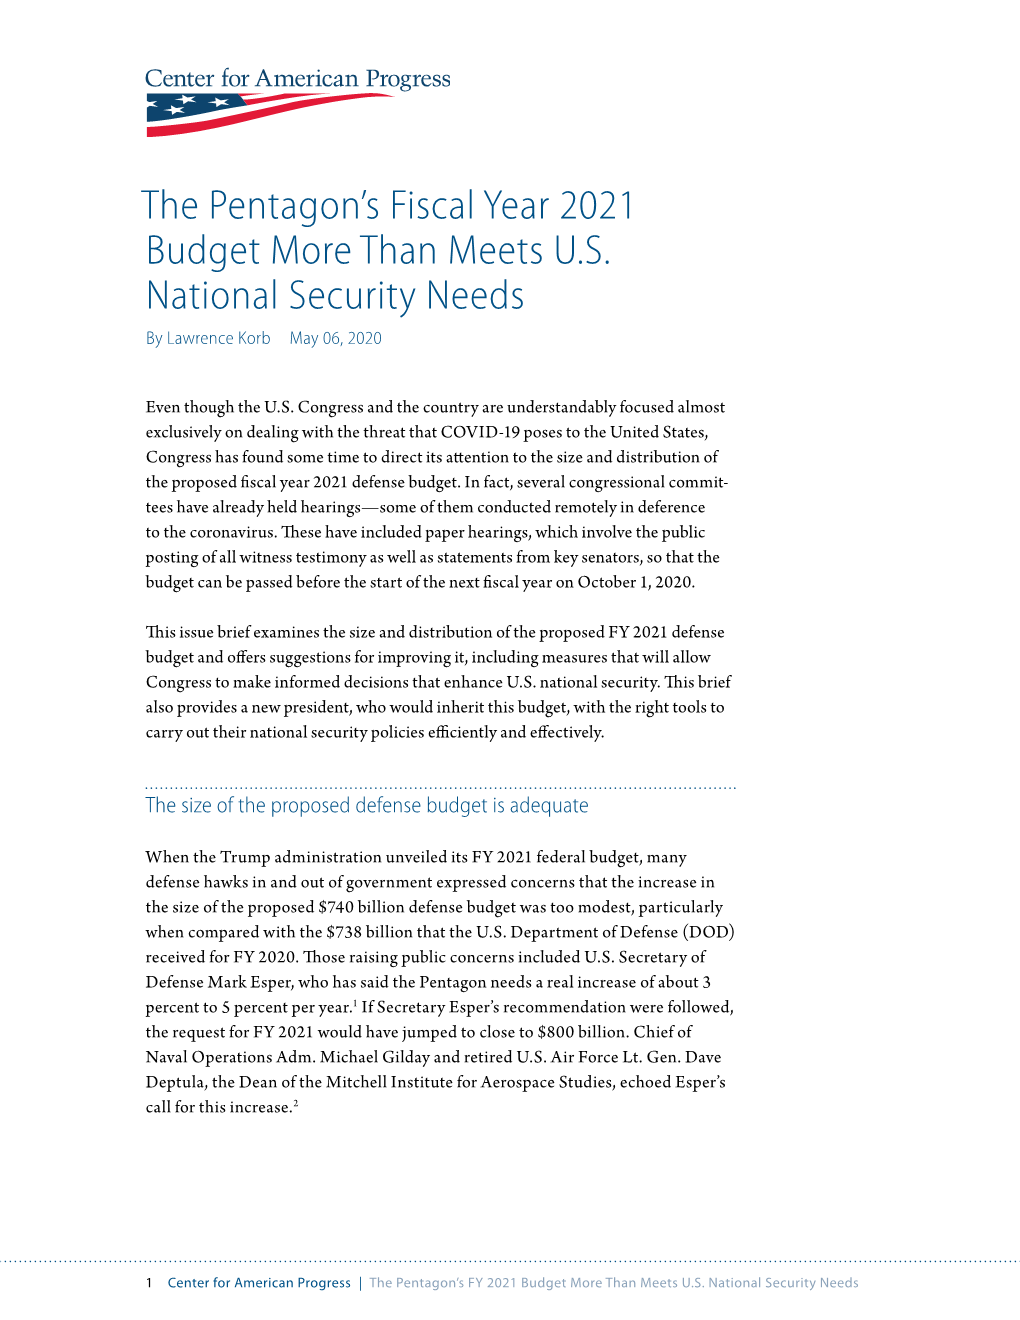 The Pentagon's Fiscal Year 2021 Budget More Than Meets U.S